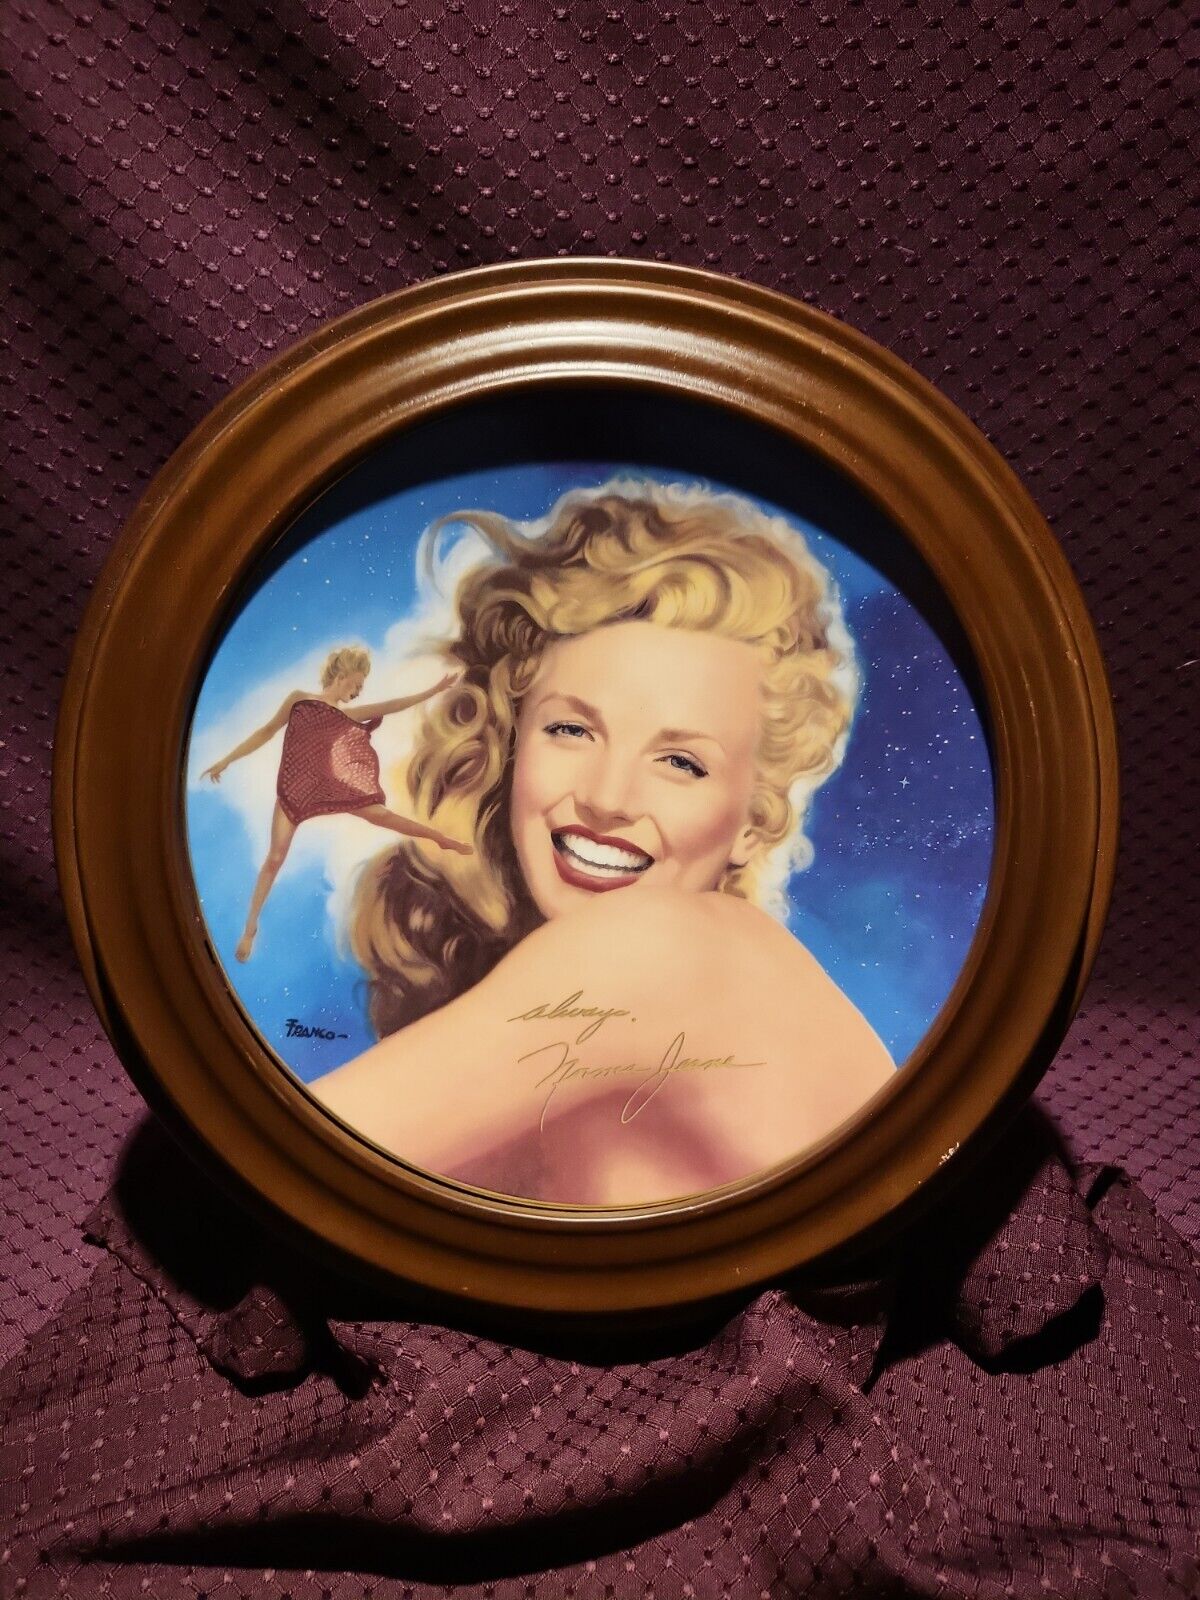 A star is born from remembering norma jeane By De Dienes Plate